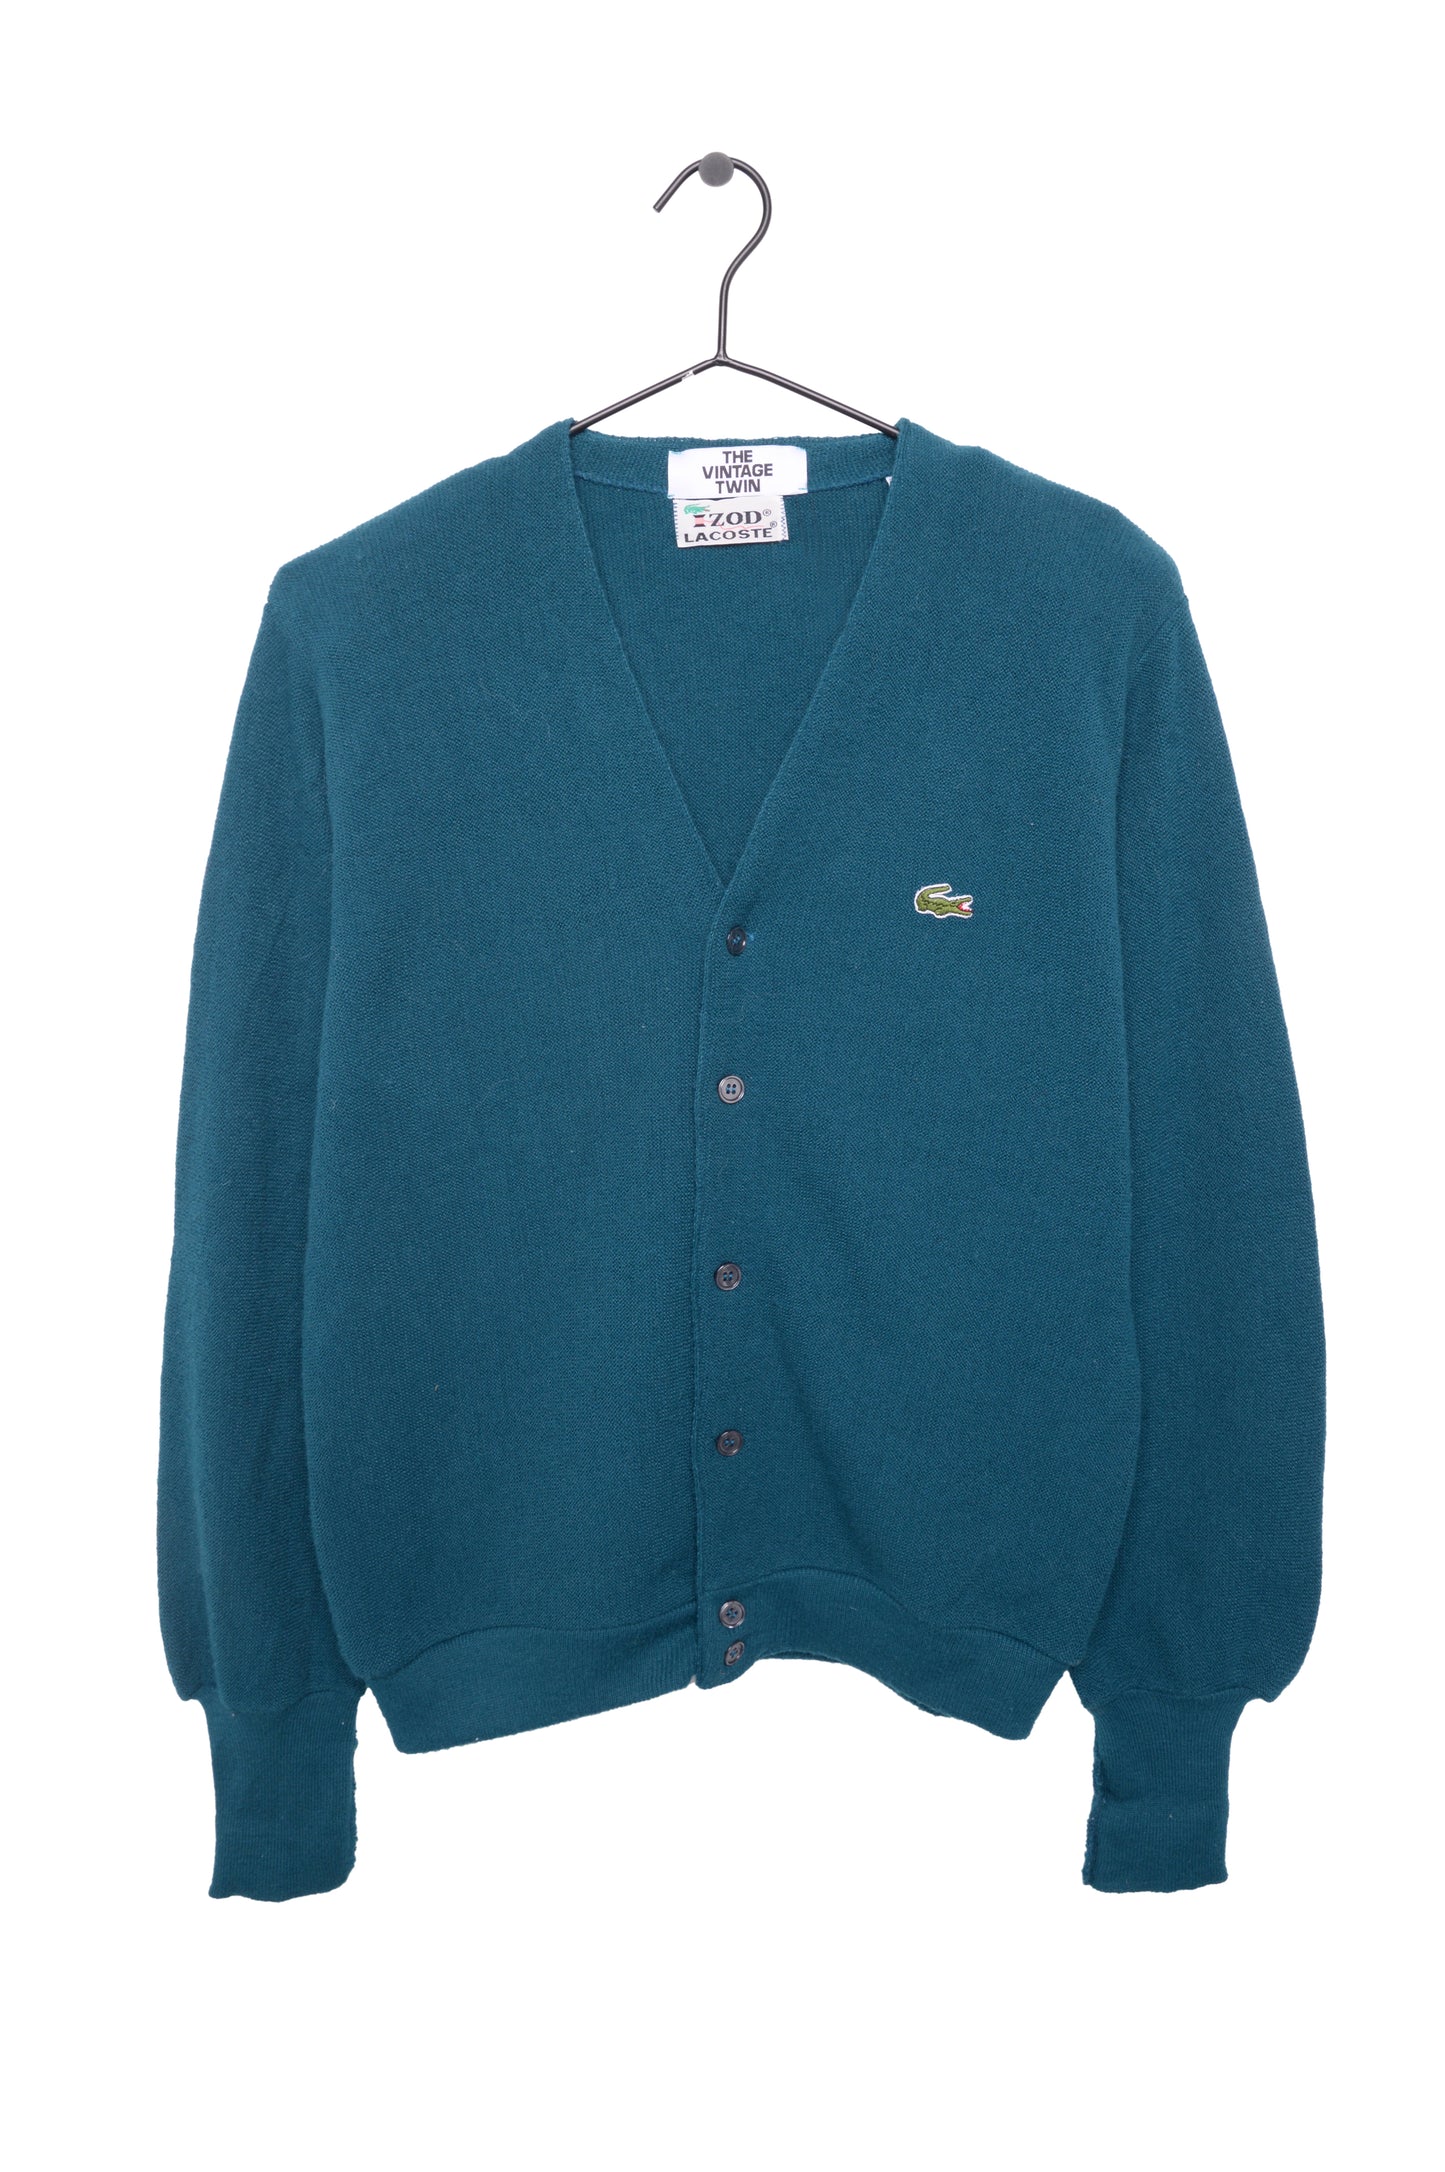 Teal Lacoste Cardigan